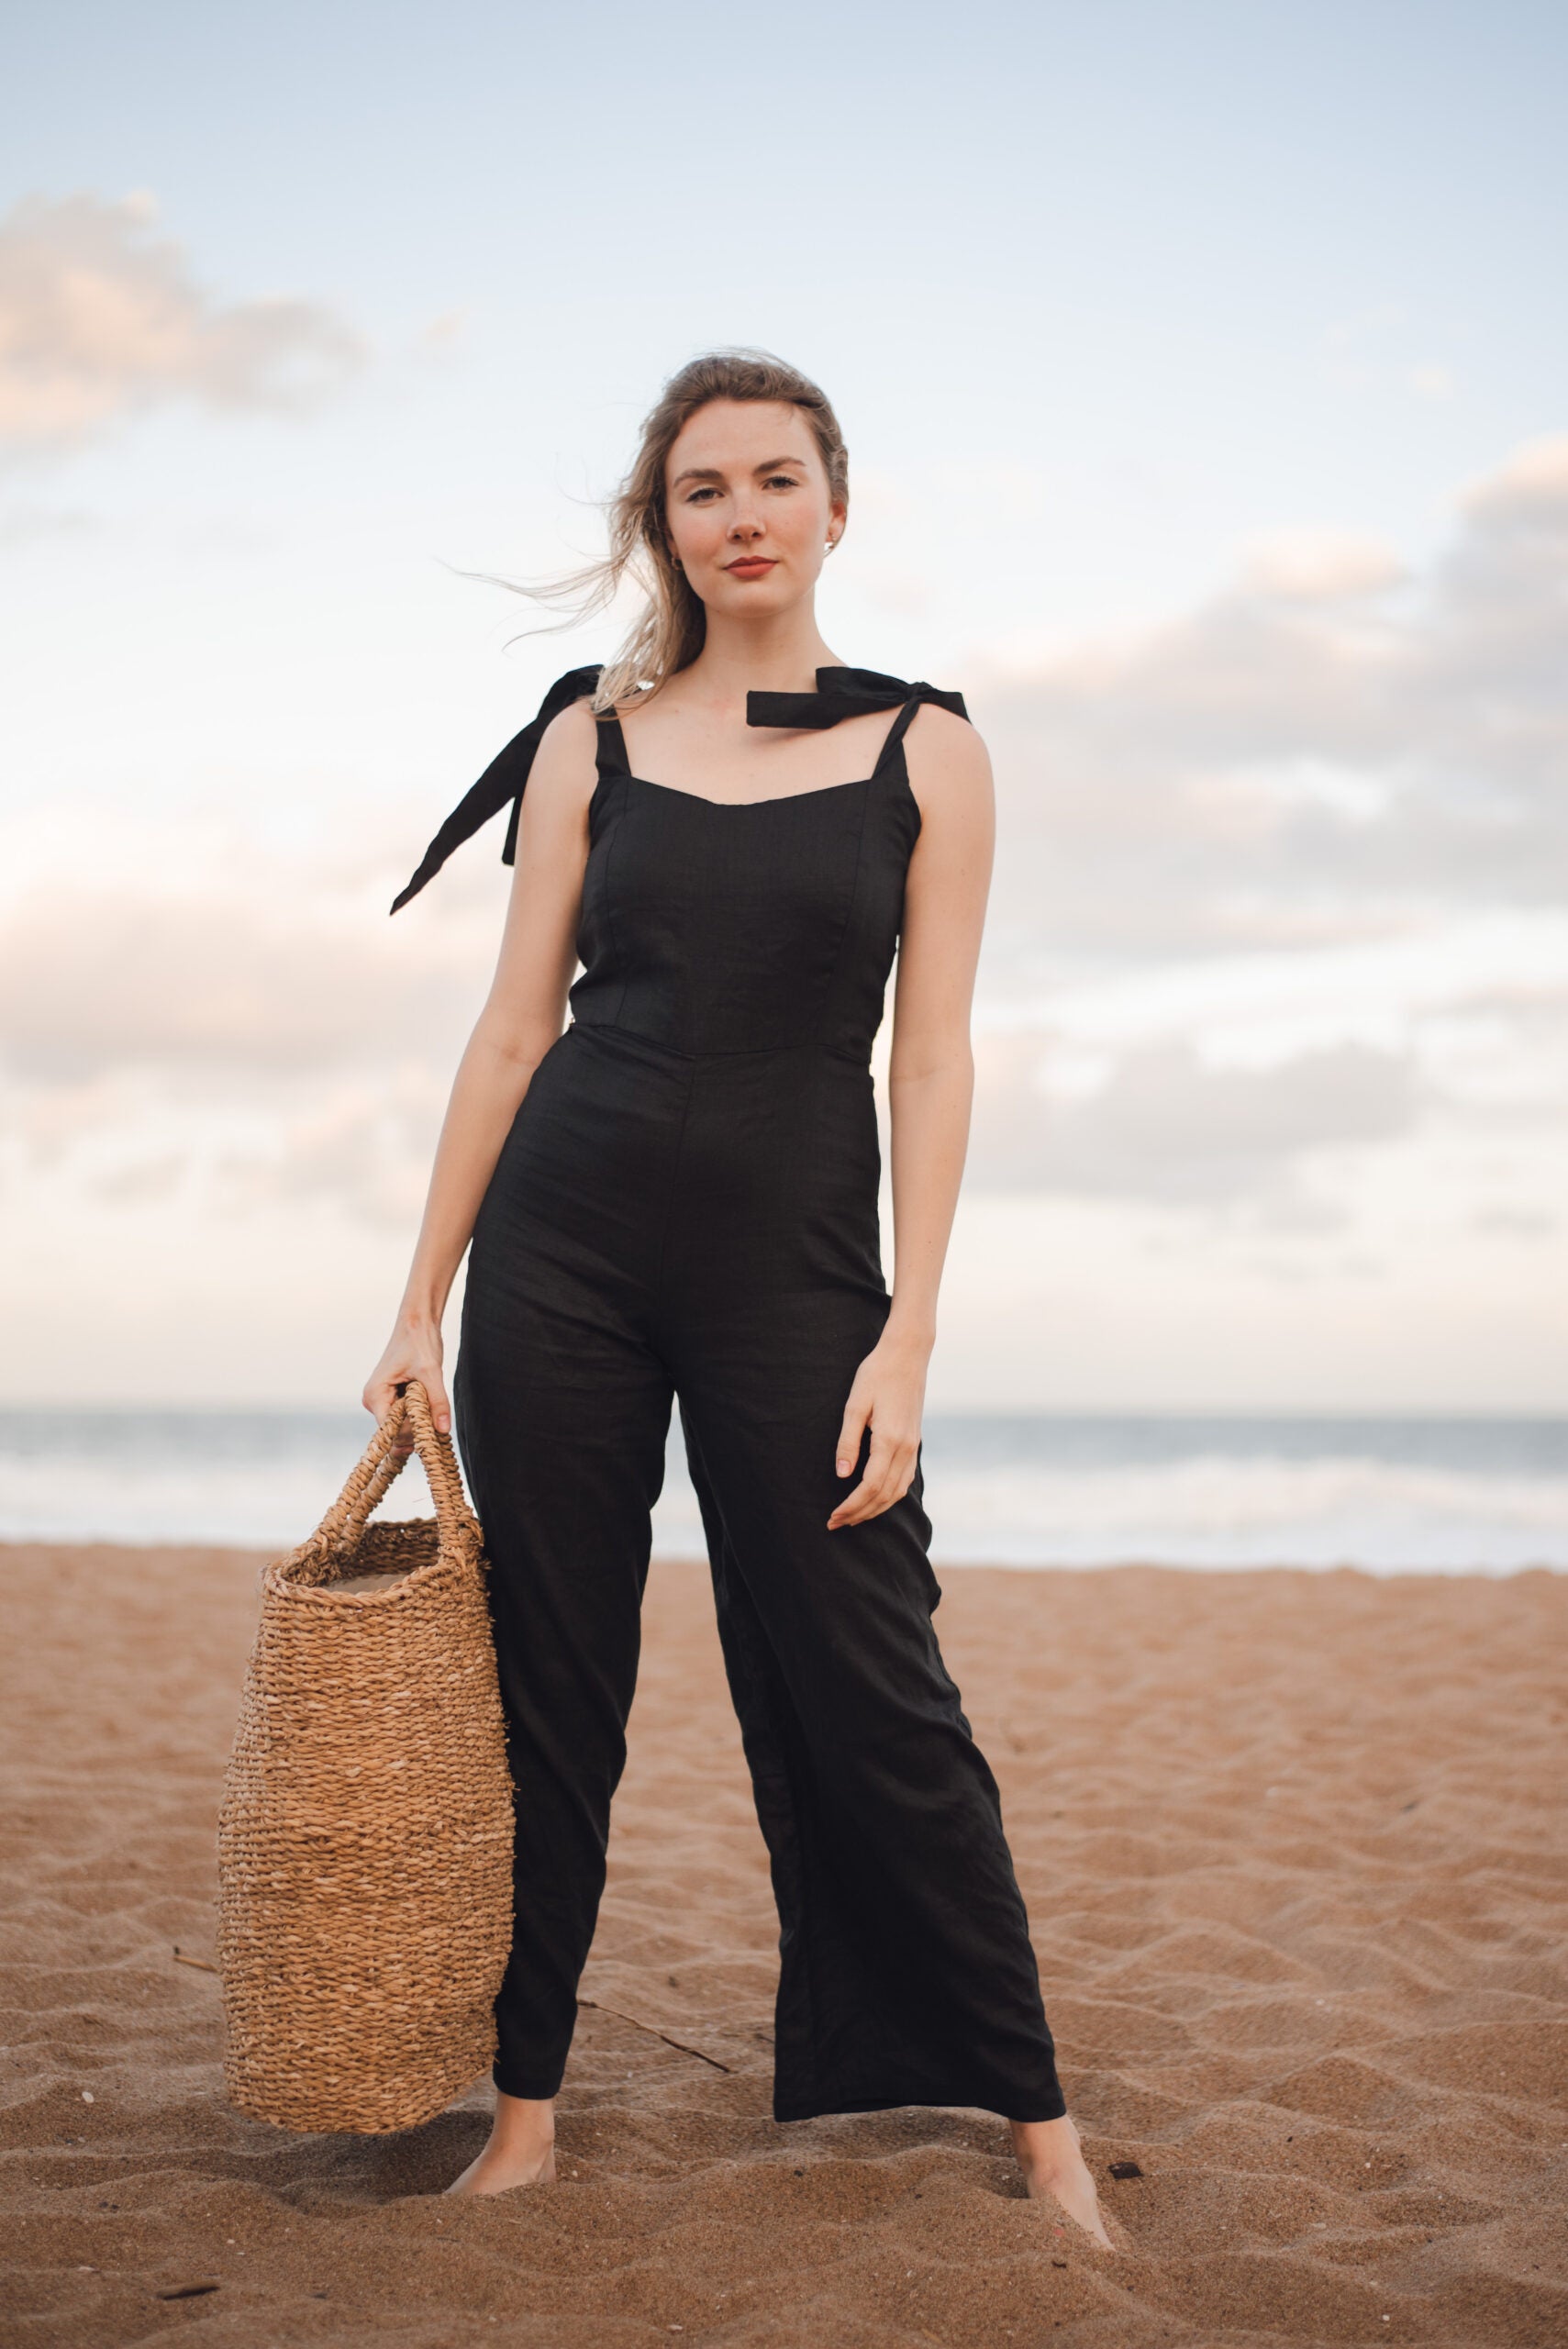 Elegant woman in black jumpsuit on beach, showcasing bespoke Linen clothing by South African designer.